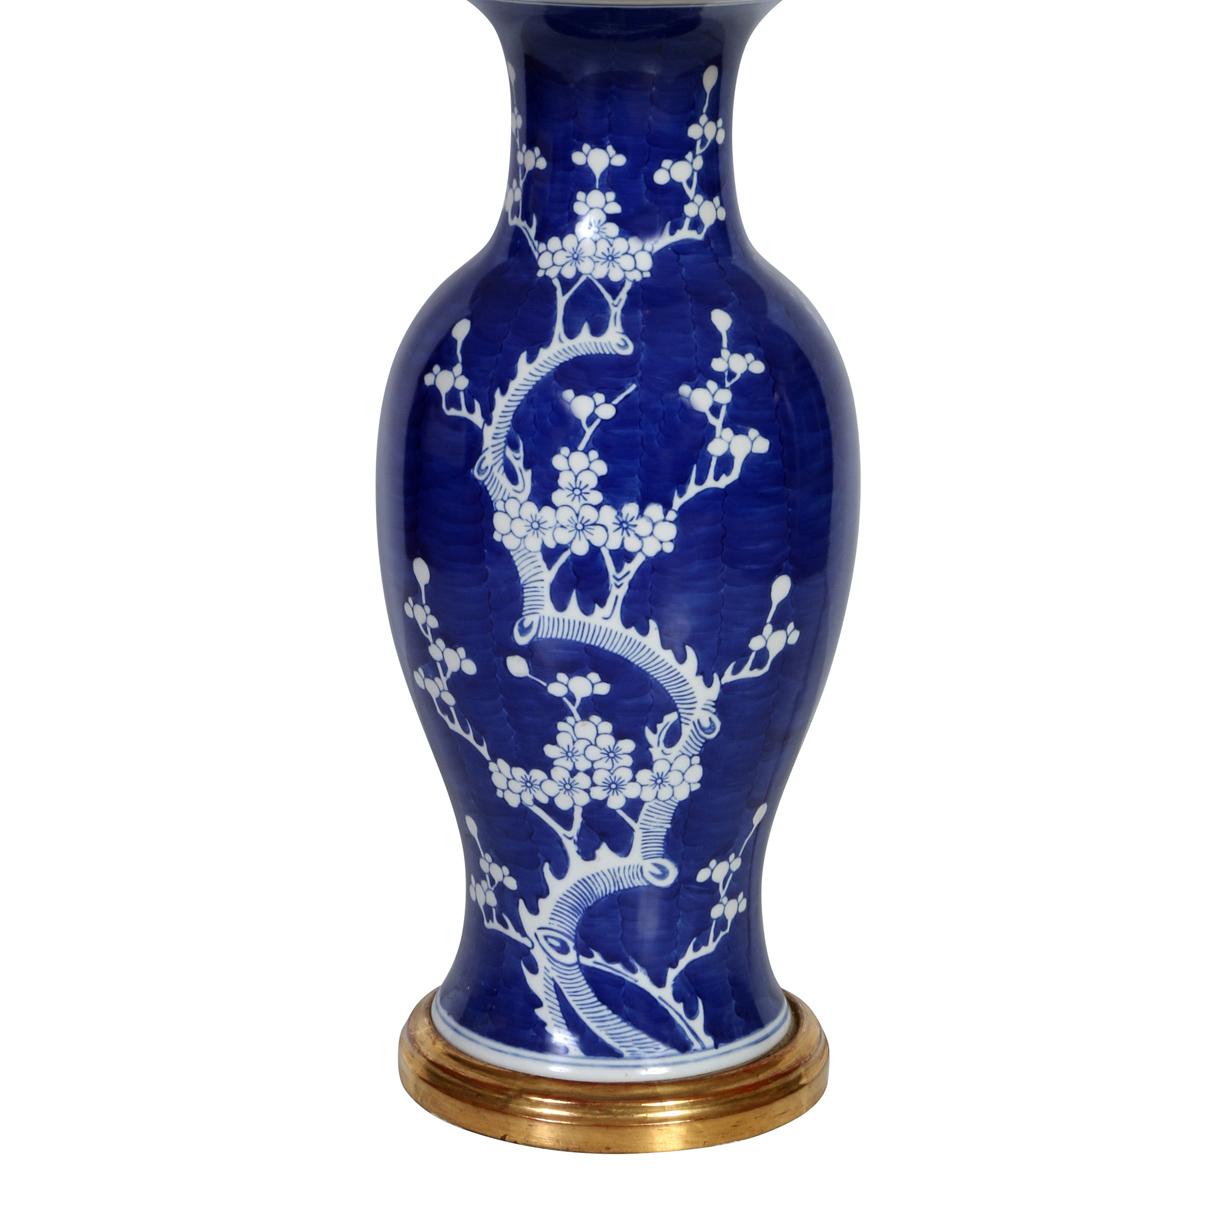 A pair of blue and white Chinese Export lamps sitting on 18 karat gold bases.  The blue lamps are beautifully decorated with white branches, leaves and flowers. A stunning pair of chinoiserie table lamps.  Shades sold separately.